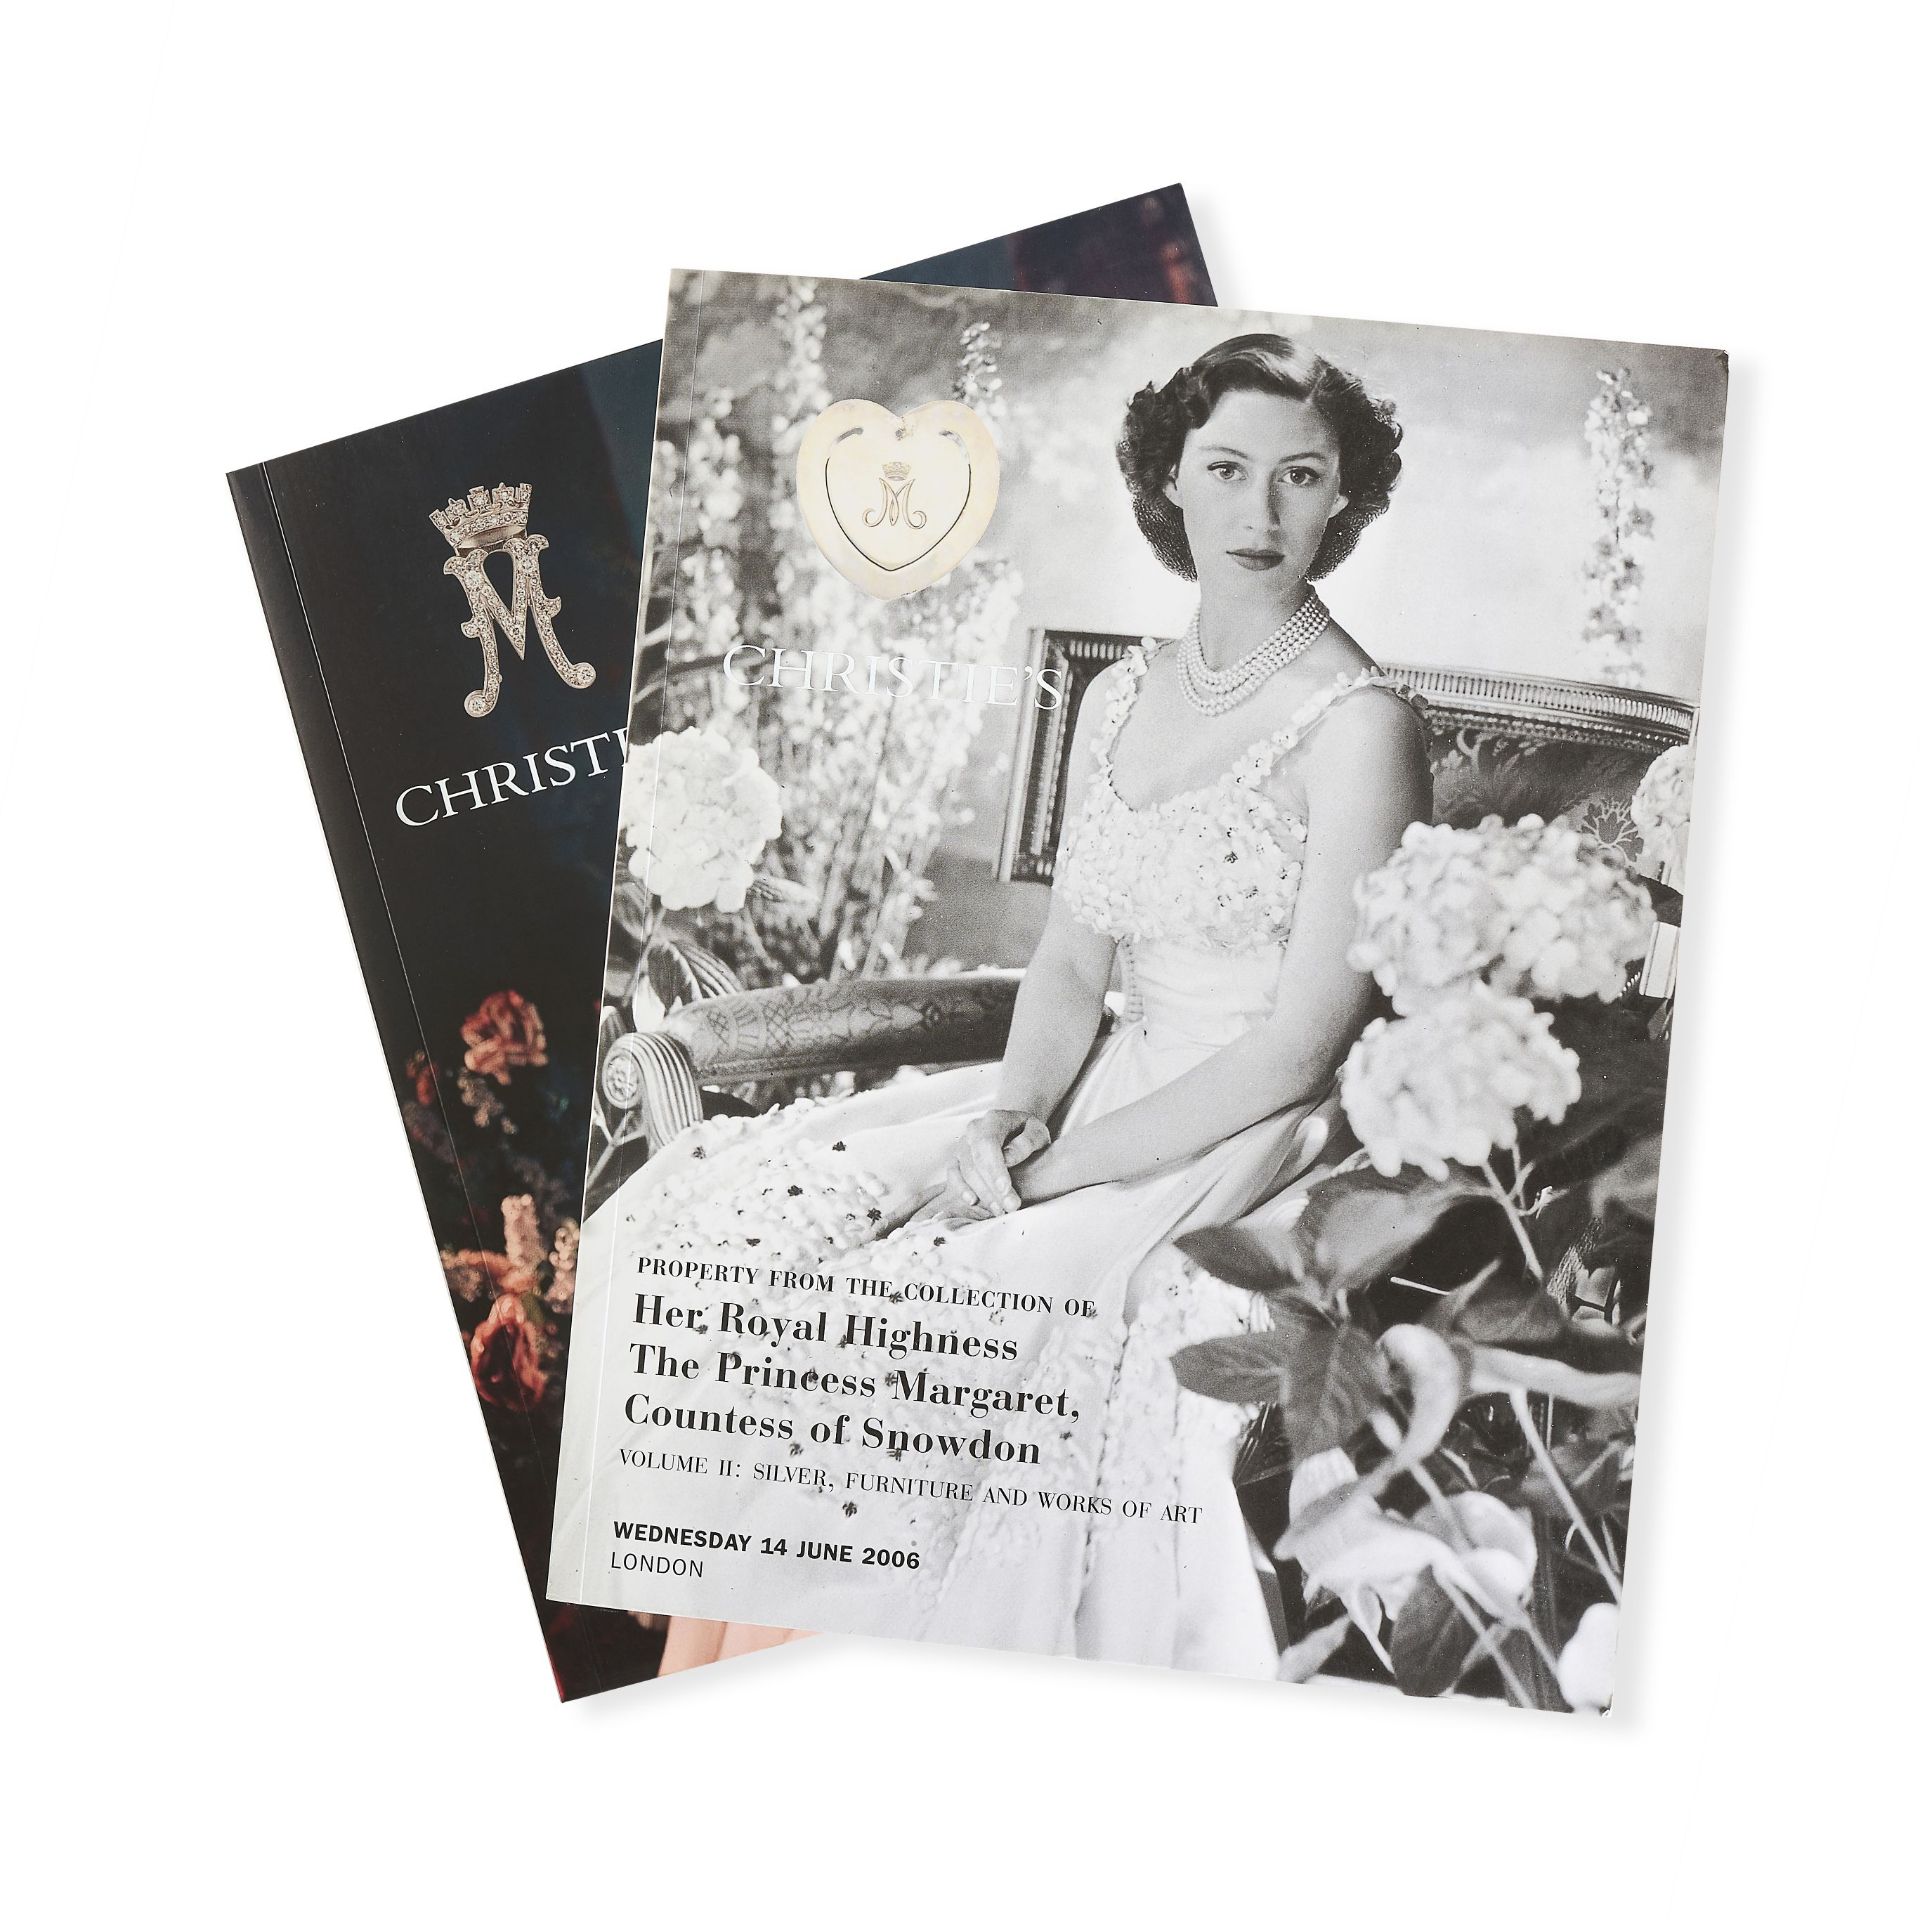 A CHRISTIE'S CATALOGUE - PROPERTY FROM THE COLLECTION OF HER ROYAL HIGHNESS THE PRINCESS MARGARET, - Image 2 of 5